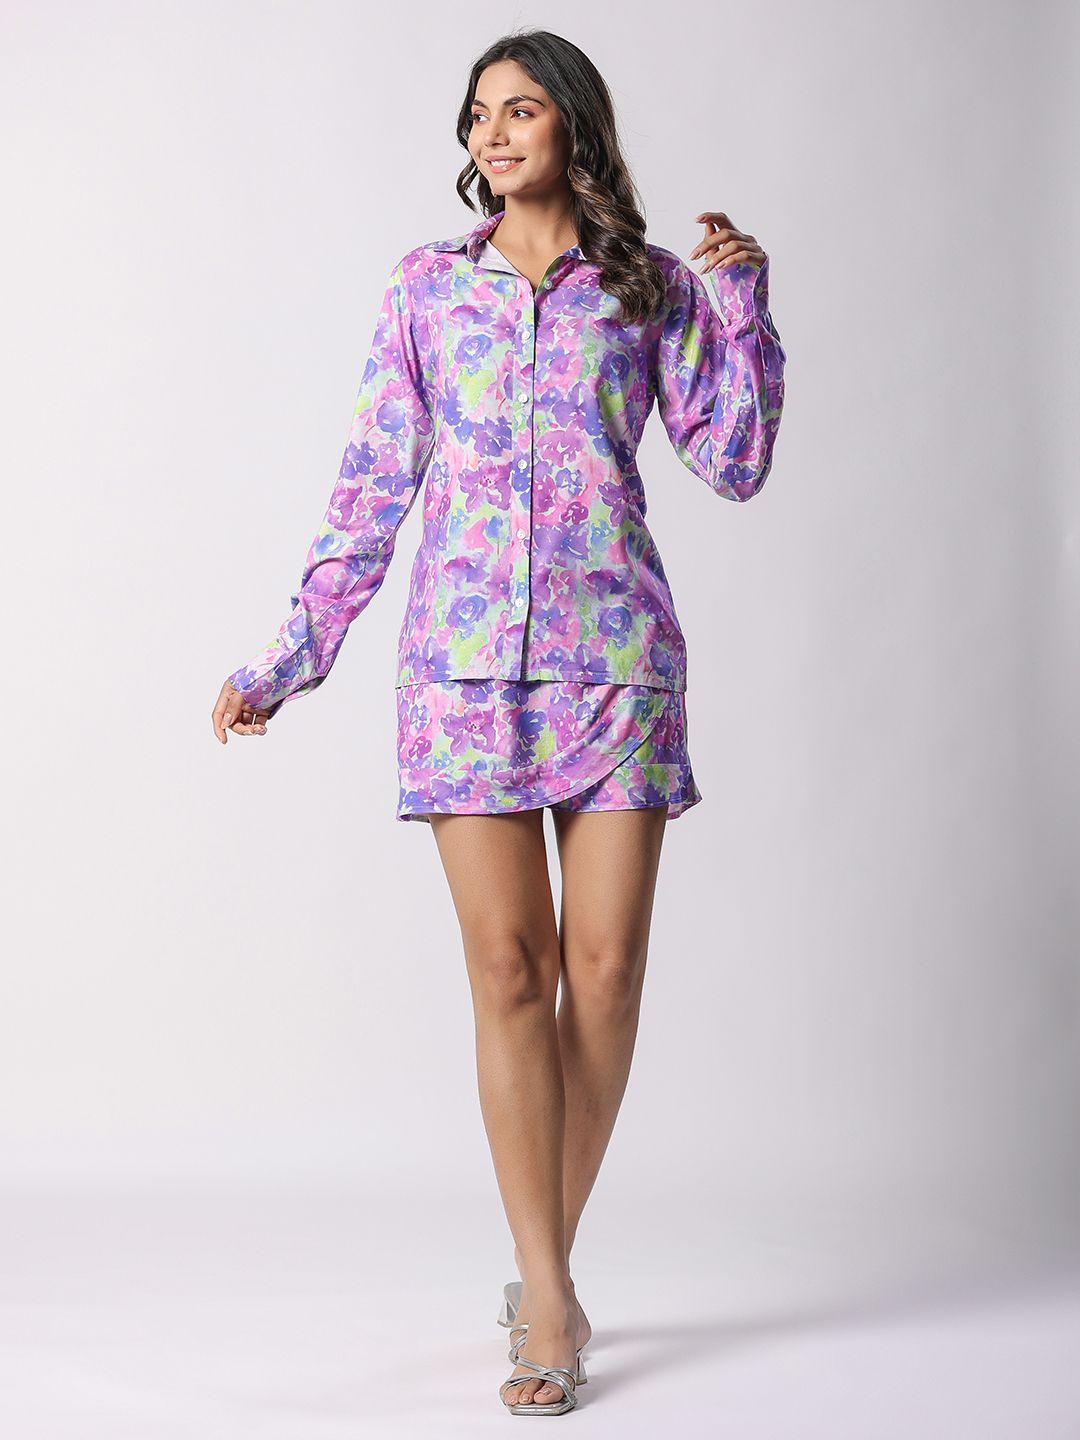 tistabene printed shirt-collar shirt with shorts co-ords